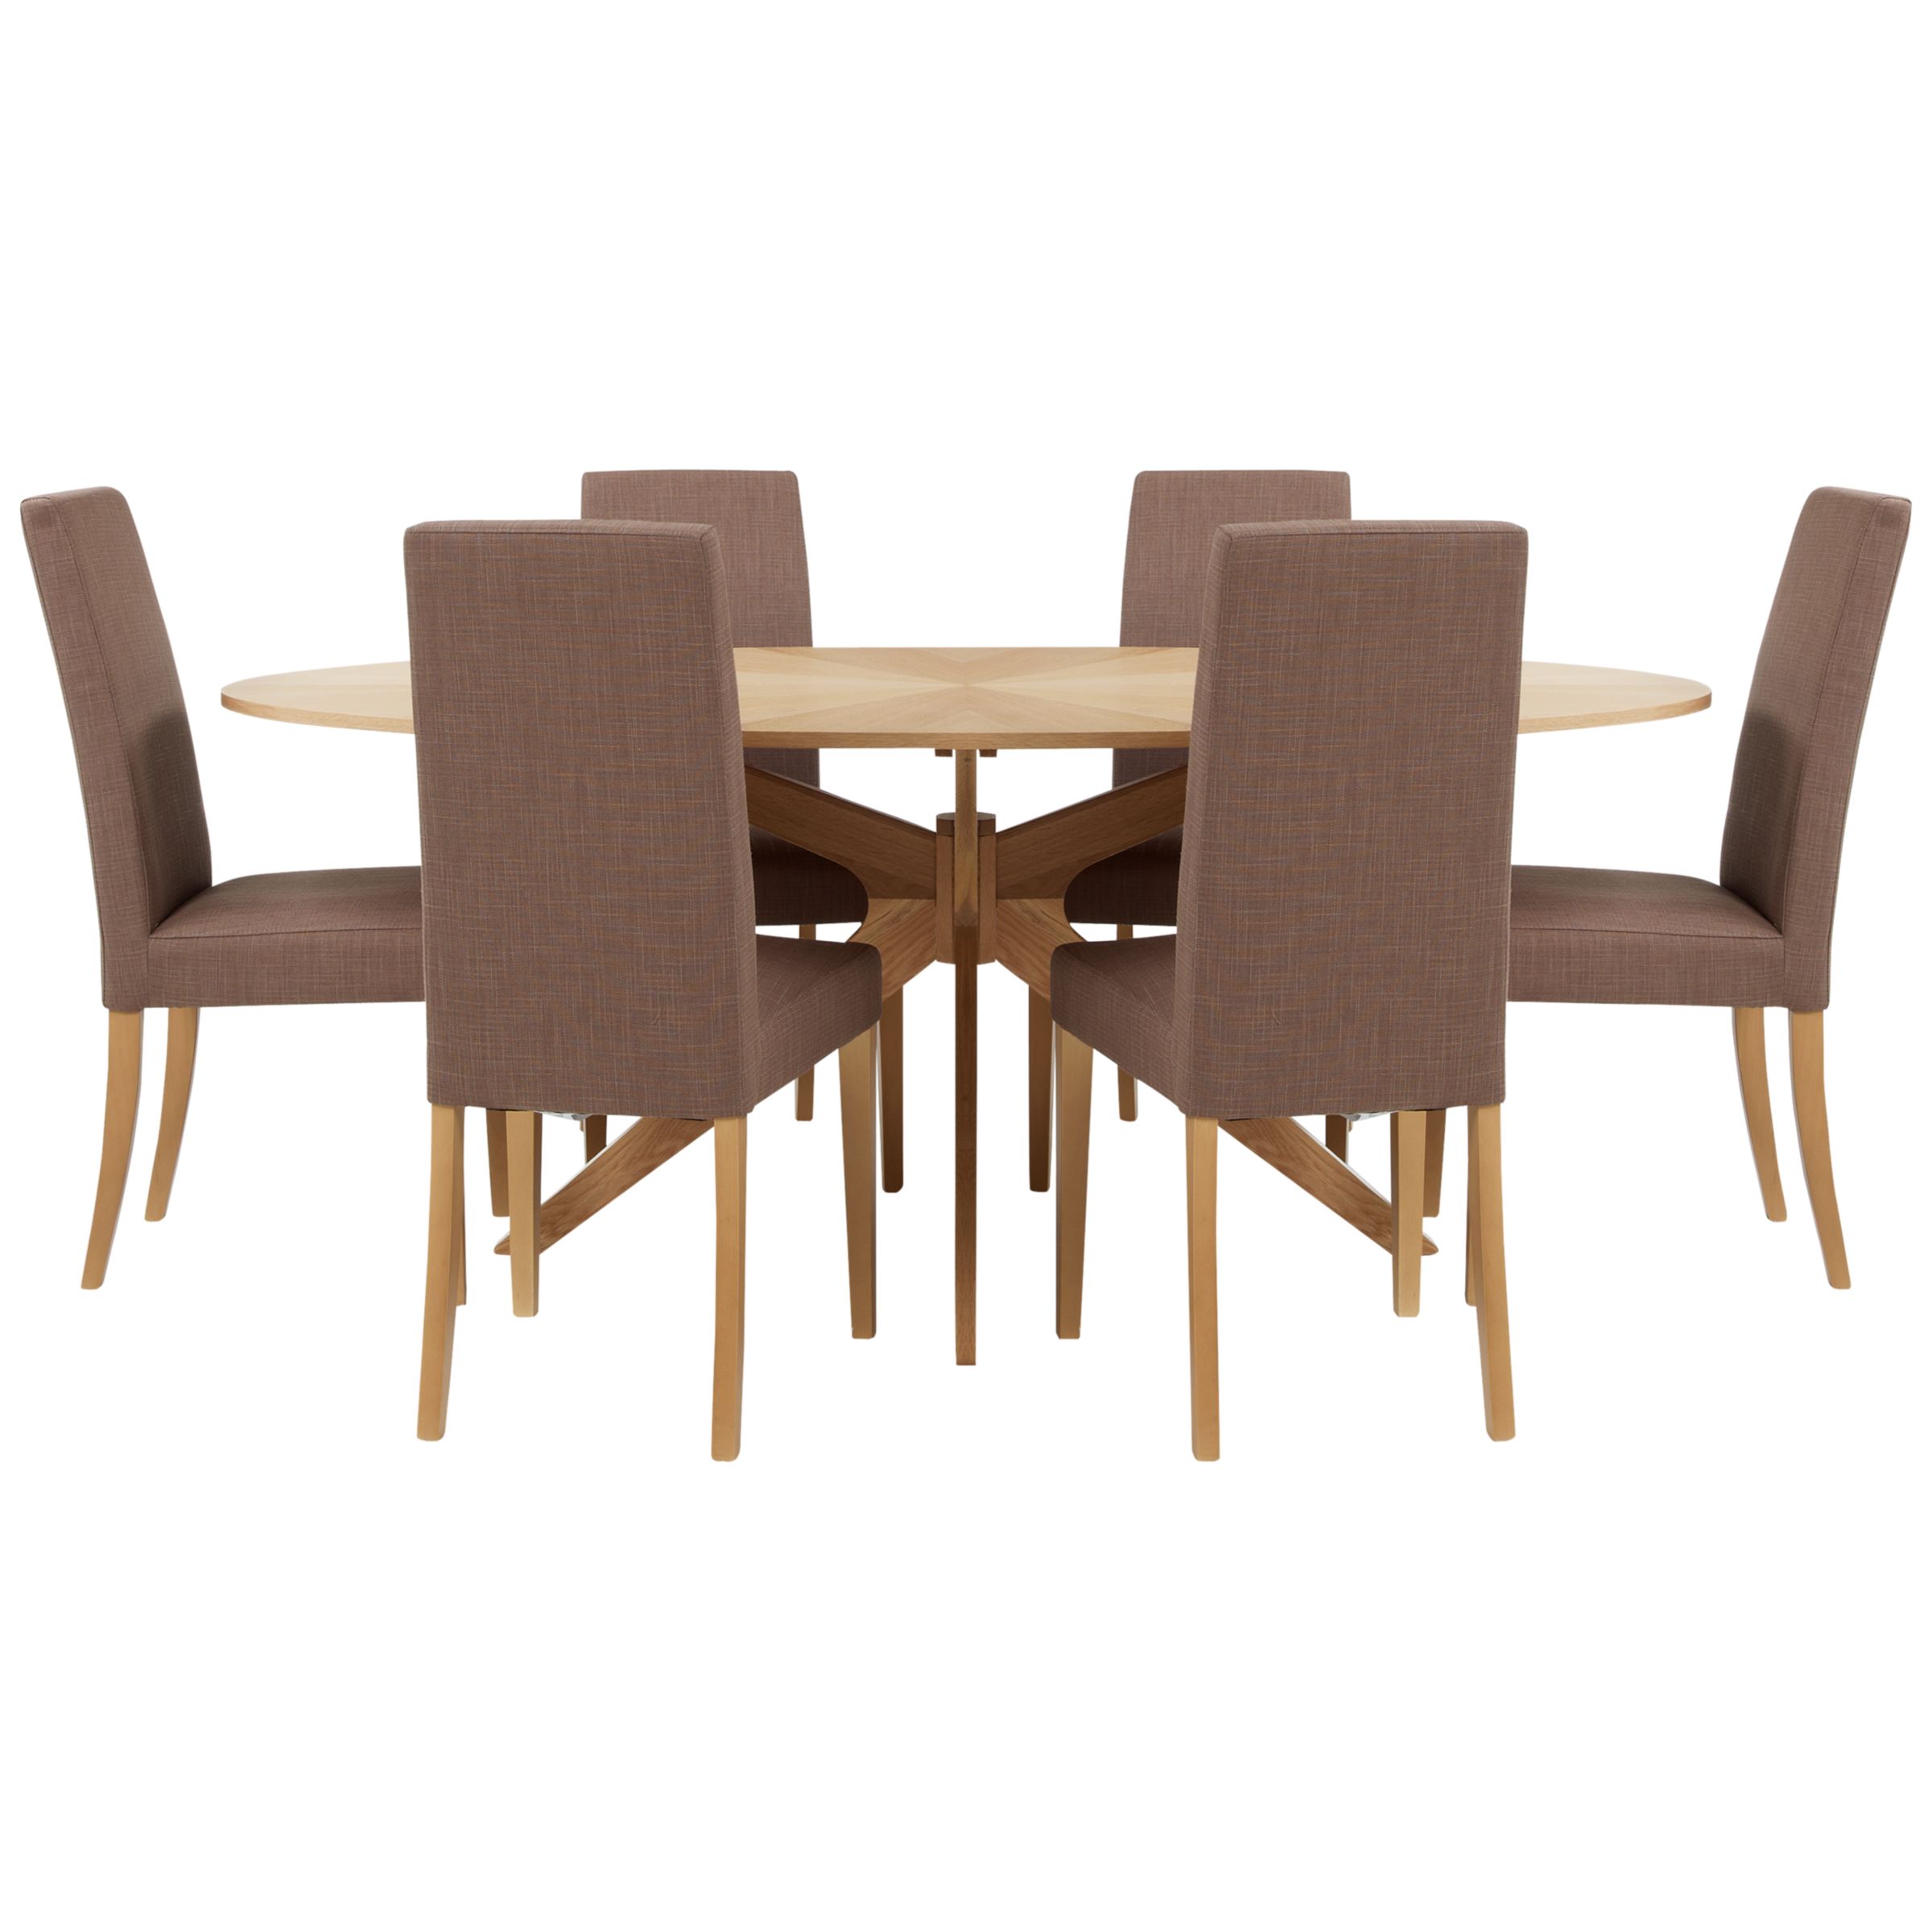 John Lewis Rigby Large Dining Table and 6 Lydia Chairs in Mocha, width 190cm